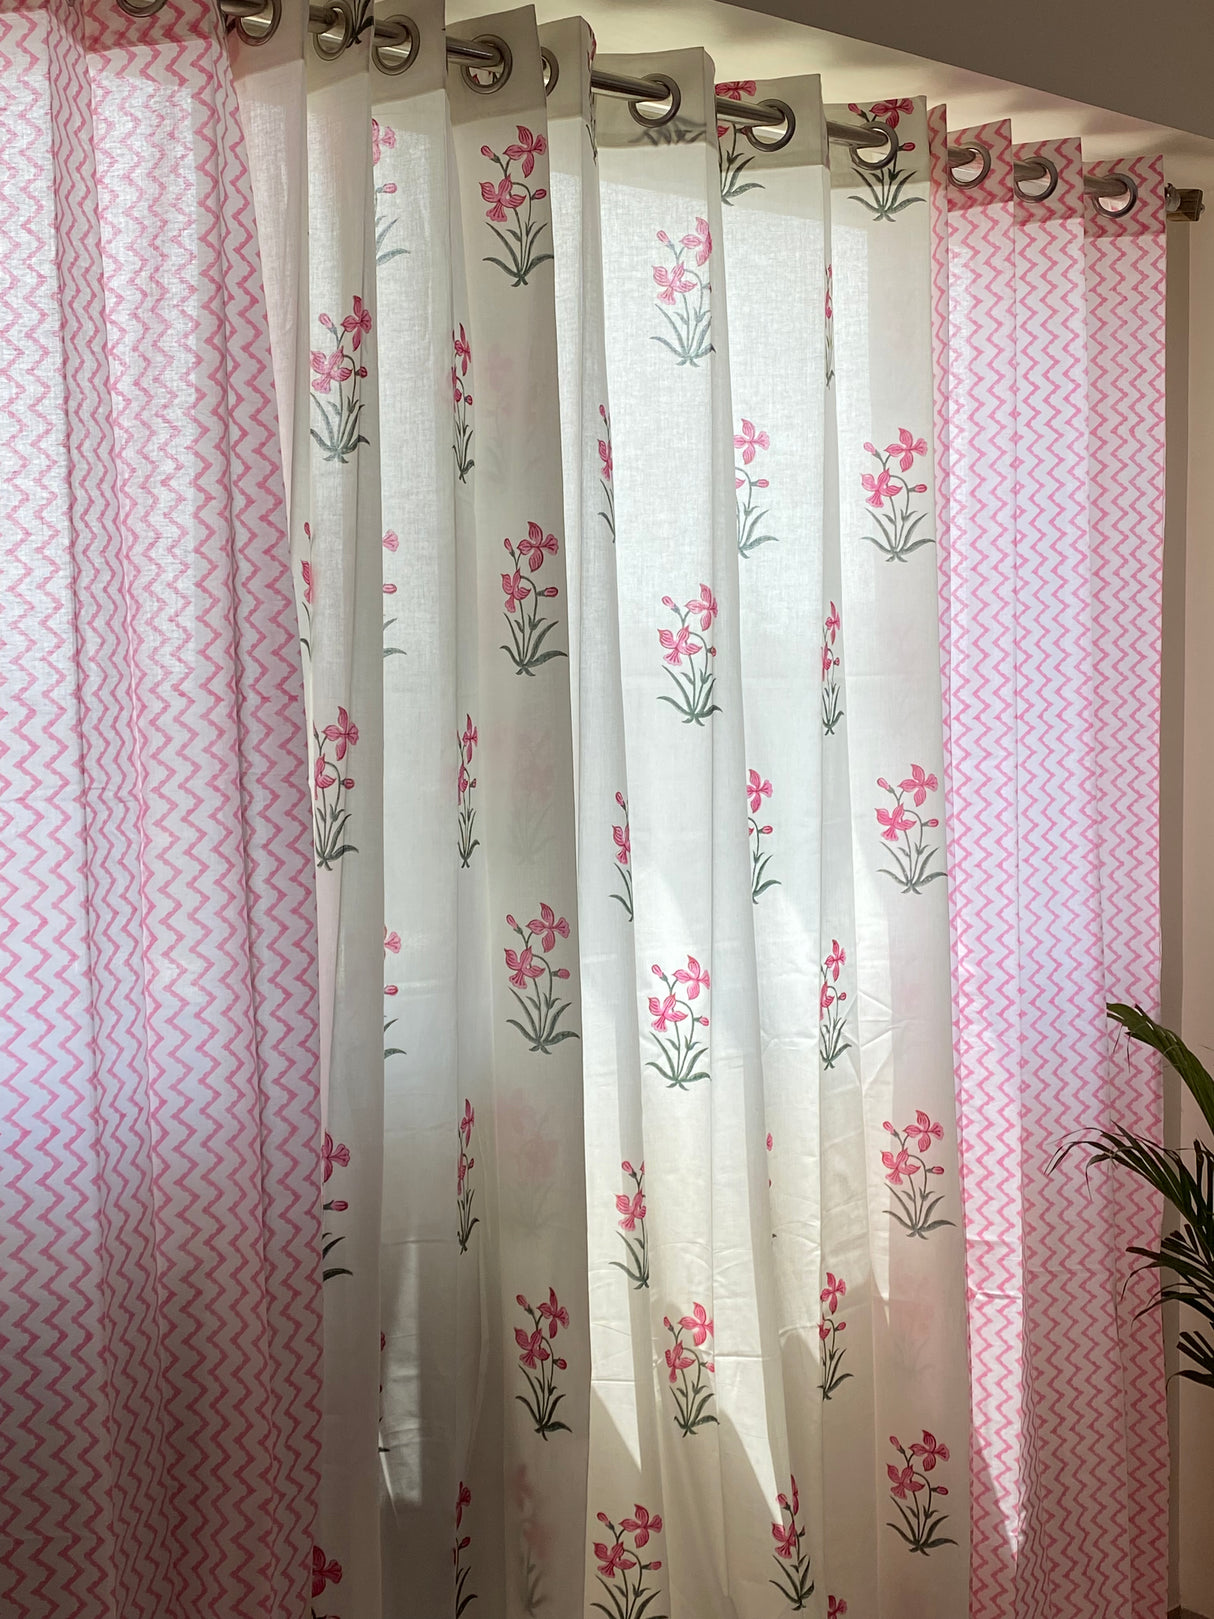 Set of 4 Hand Block Printed Cotton Curtain